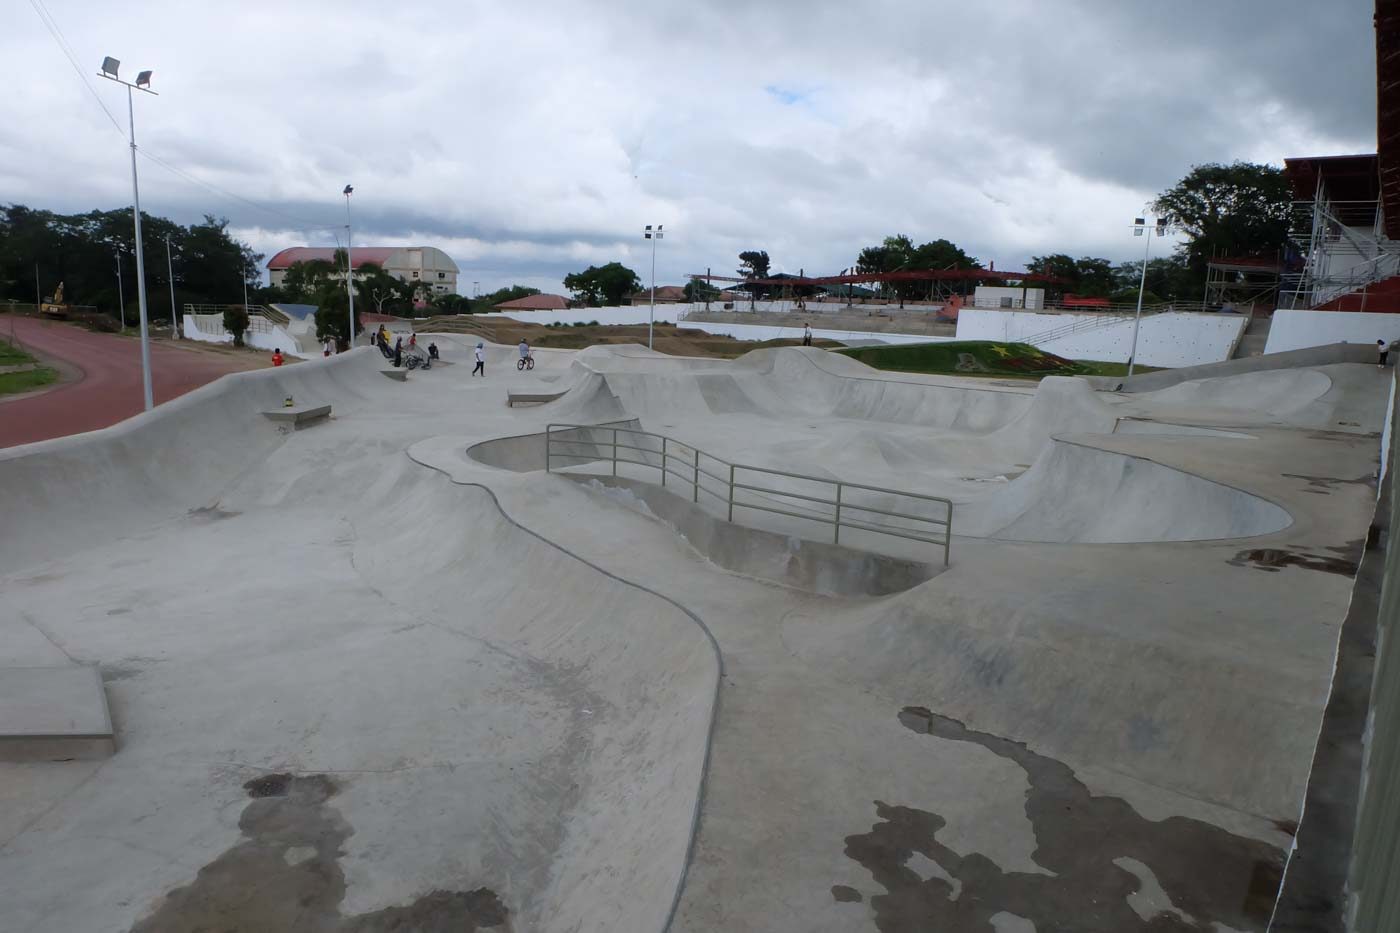 PARK EVENTS. The skateboarding venue for the park events is ready for use. Photo by Beatrice Go/Rappler 